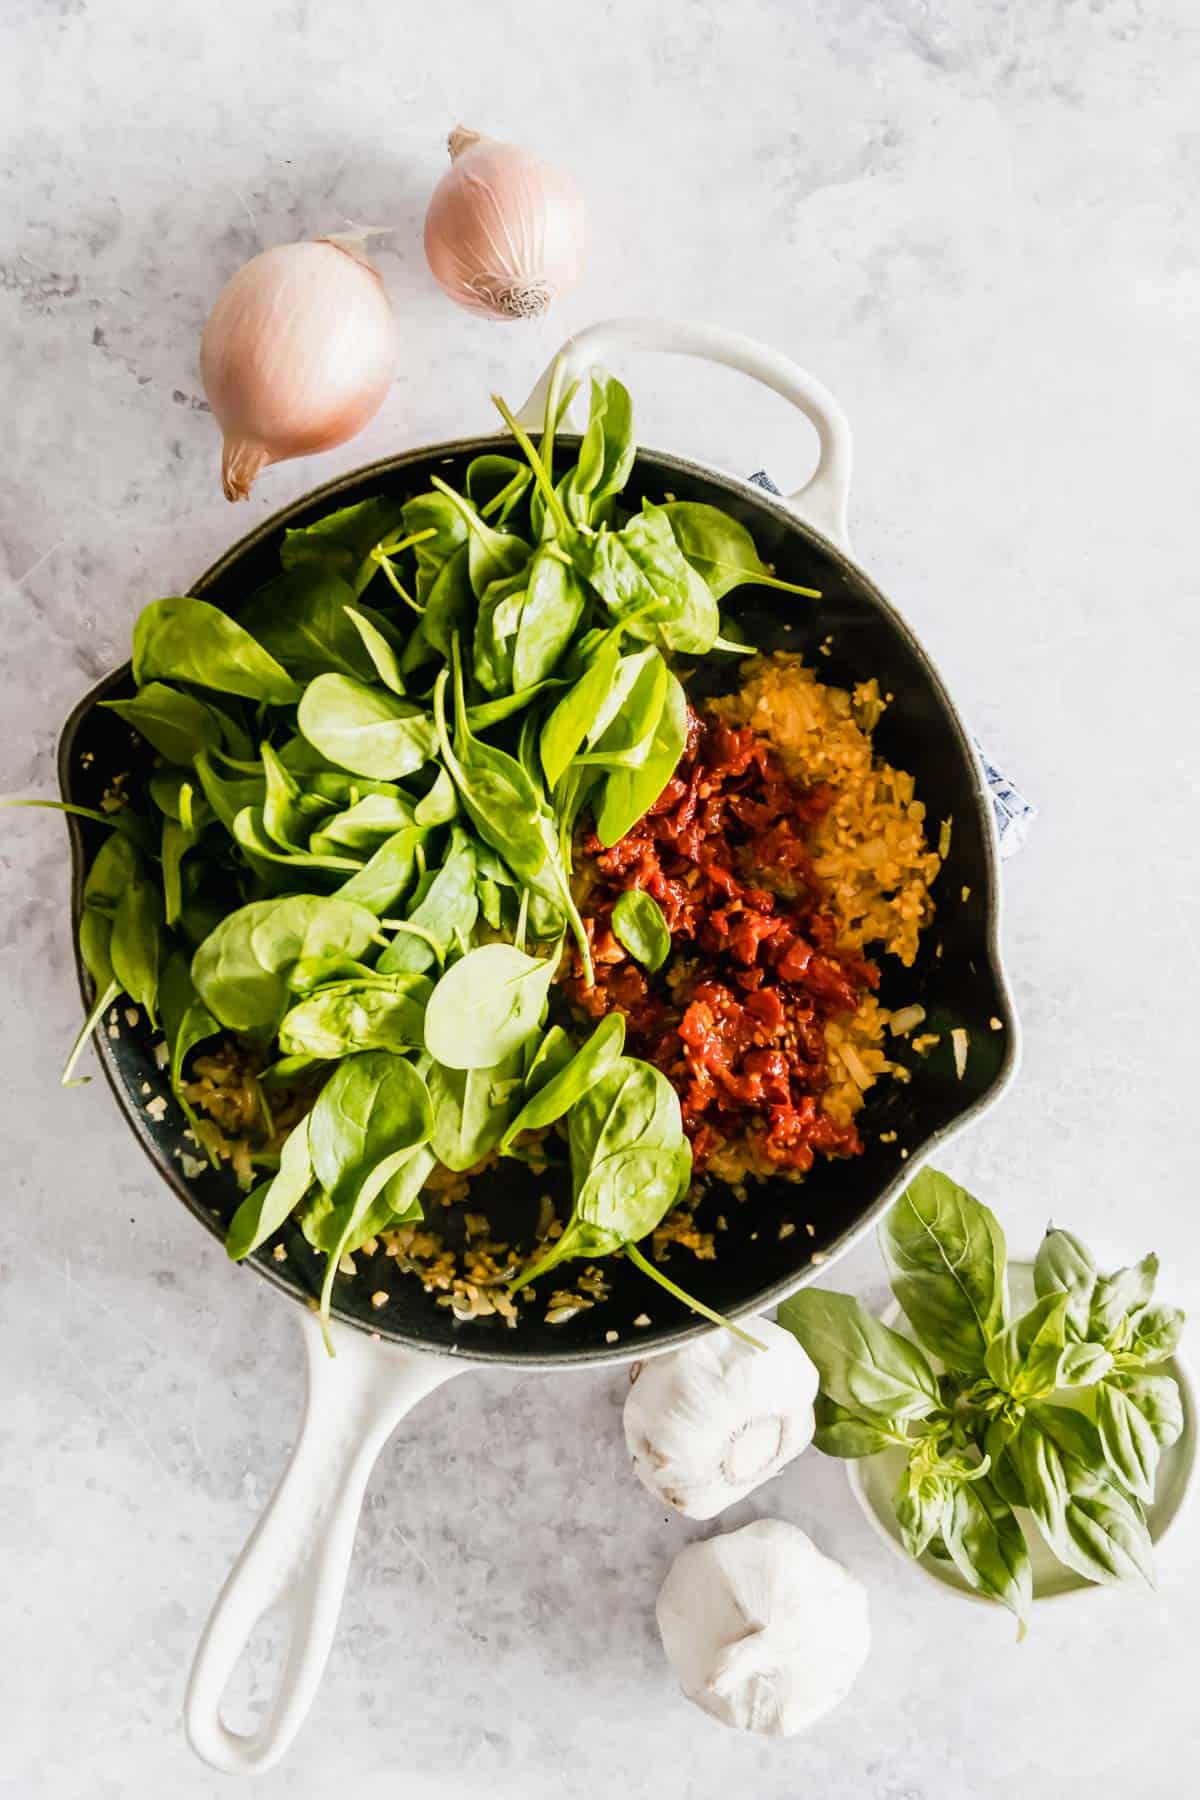 A skillet filled with rice, sun-dried tomatoes, and fresh spinach, surrounded by garlic and onions on a marble countertop.